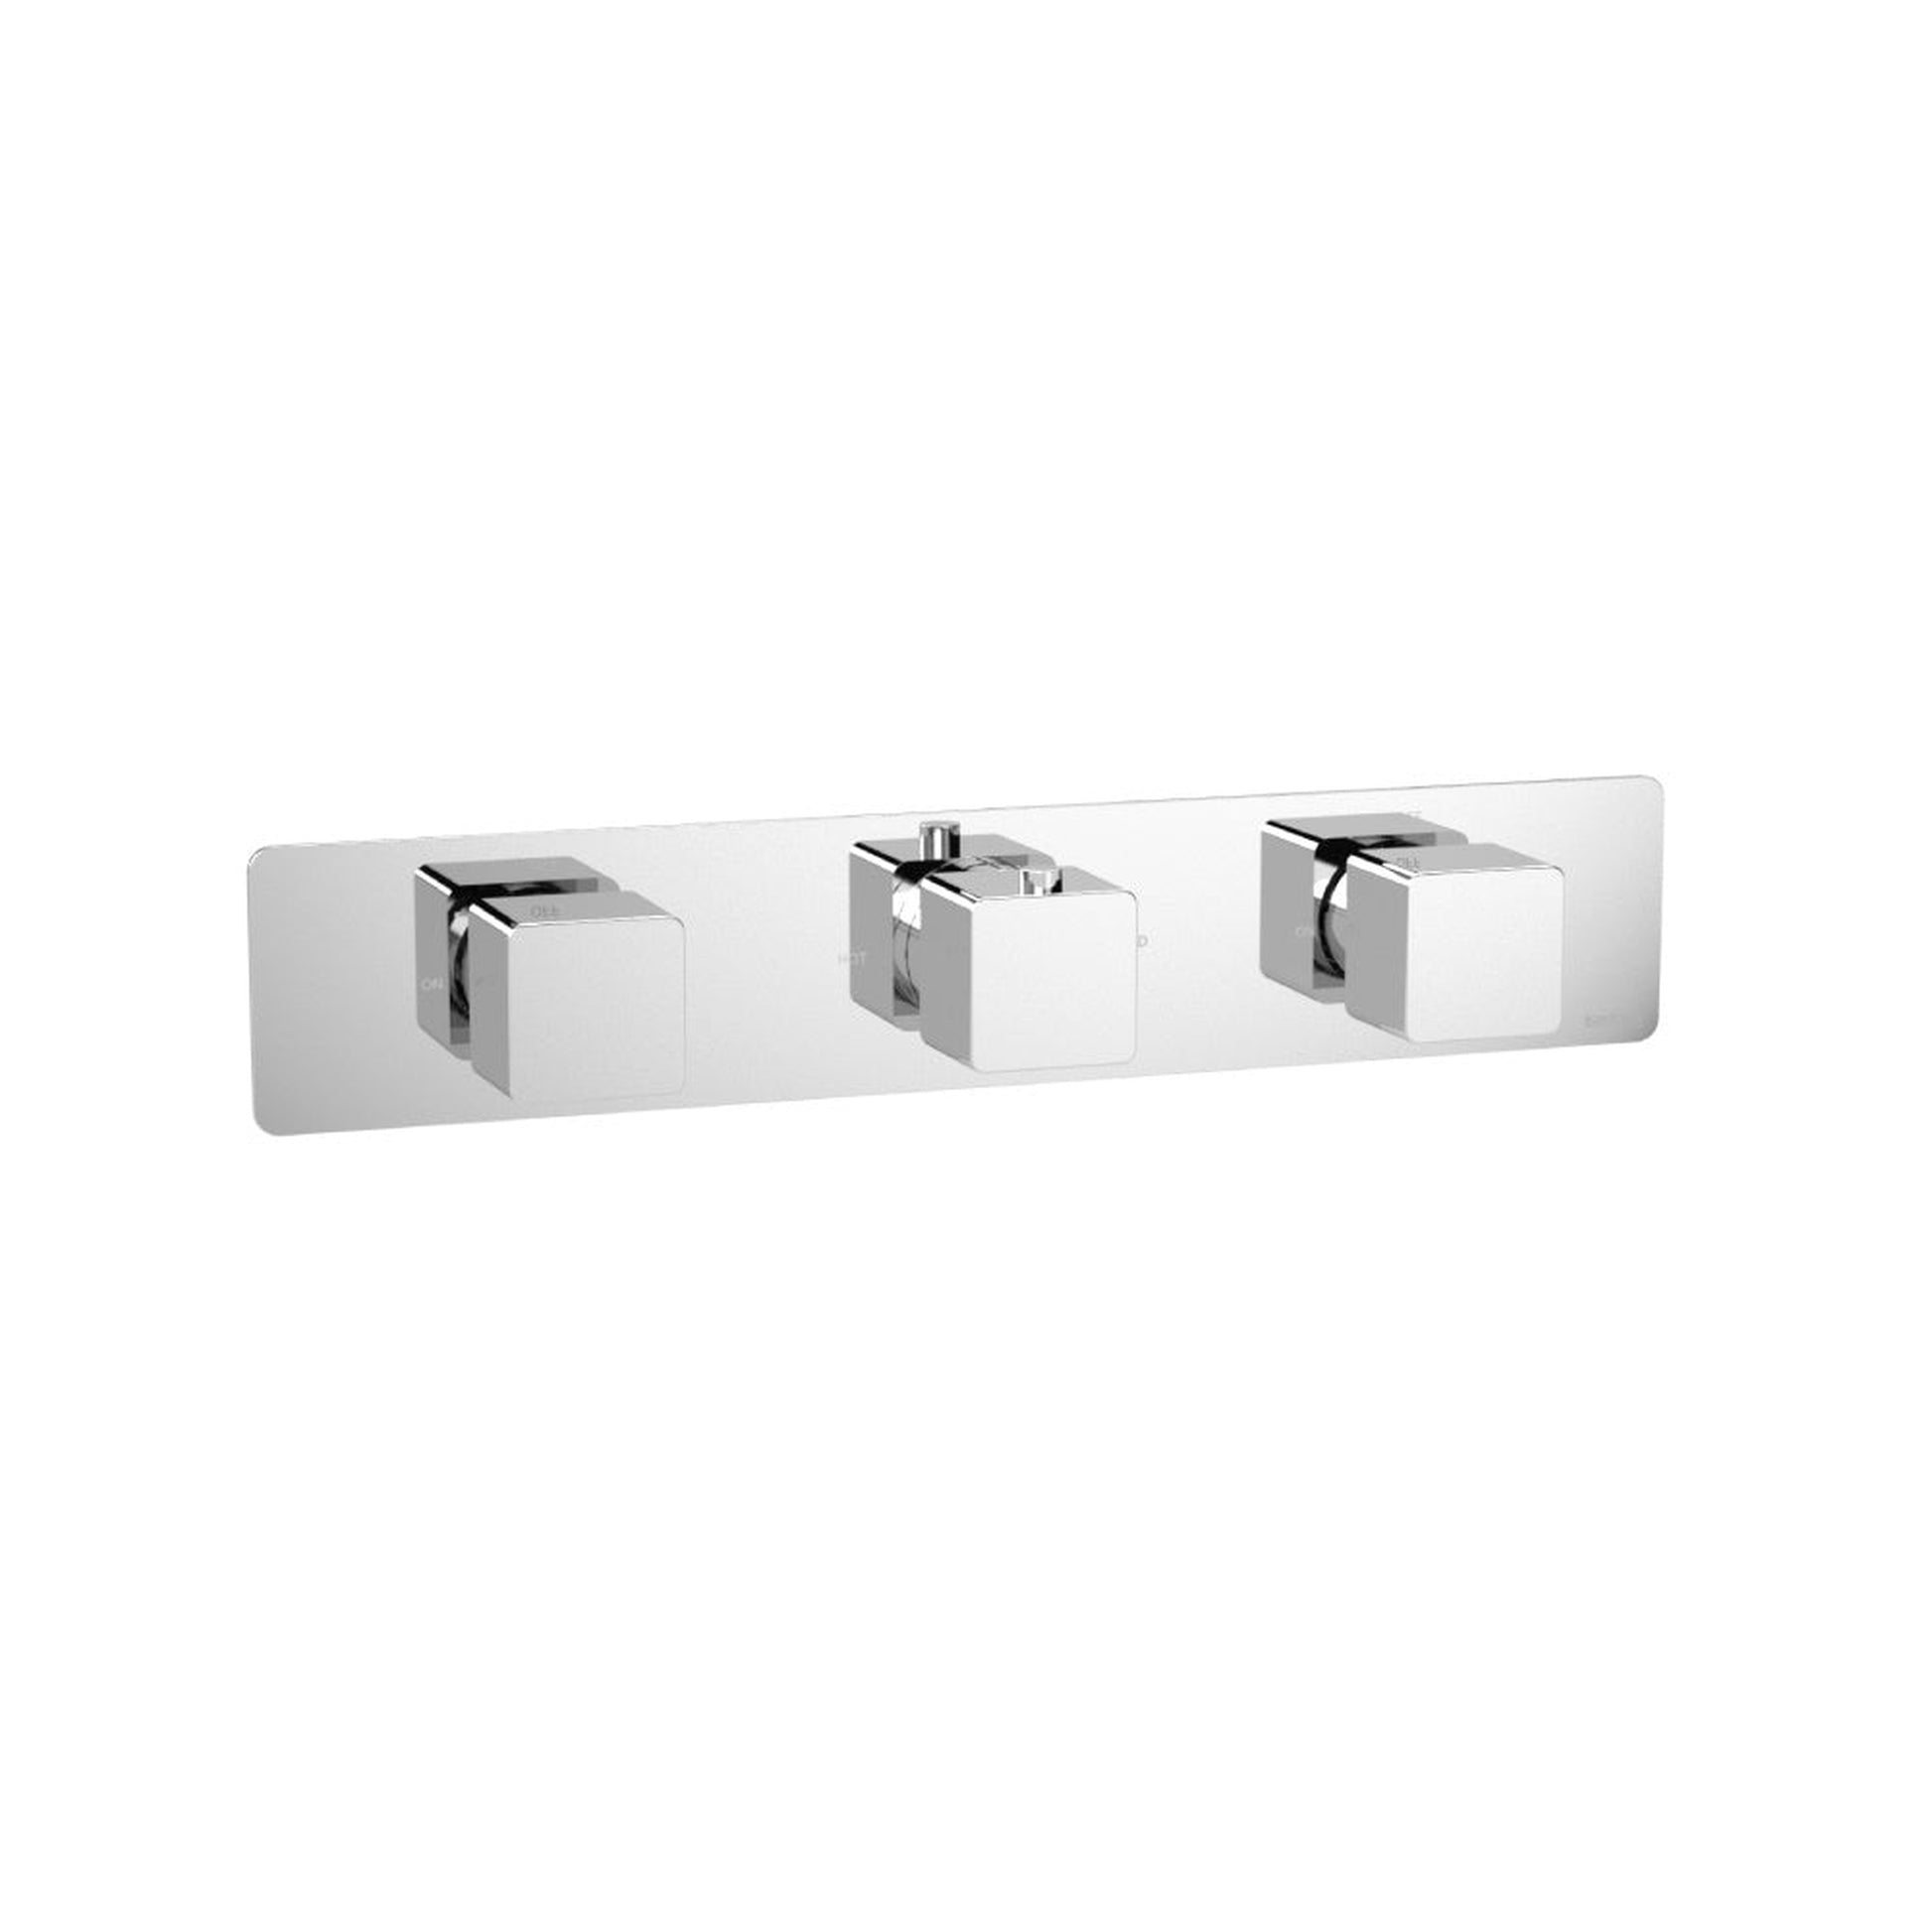 Isenberg Serie 196 3/4" Two Output Horizontal Thermostatic Valve With 2 Volume Control and Trim in Chrome